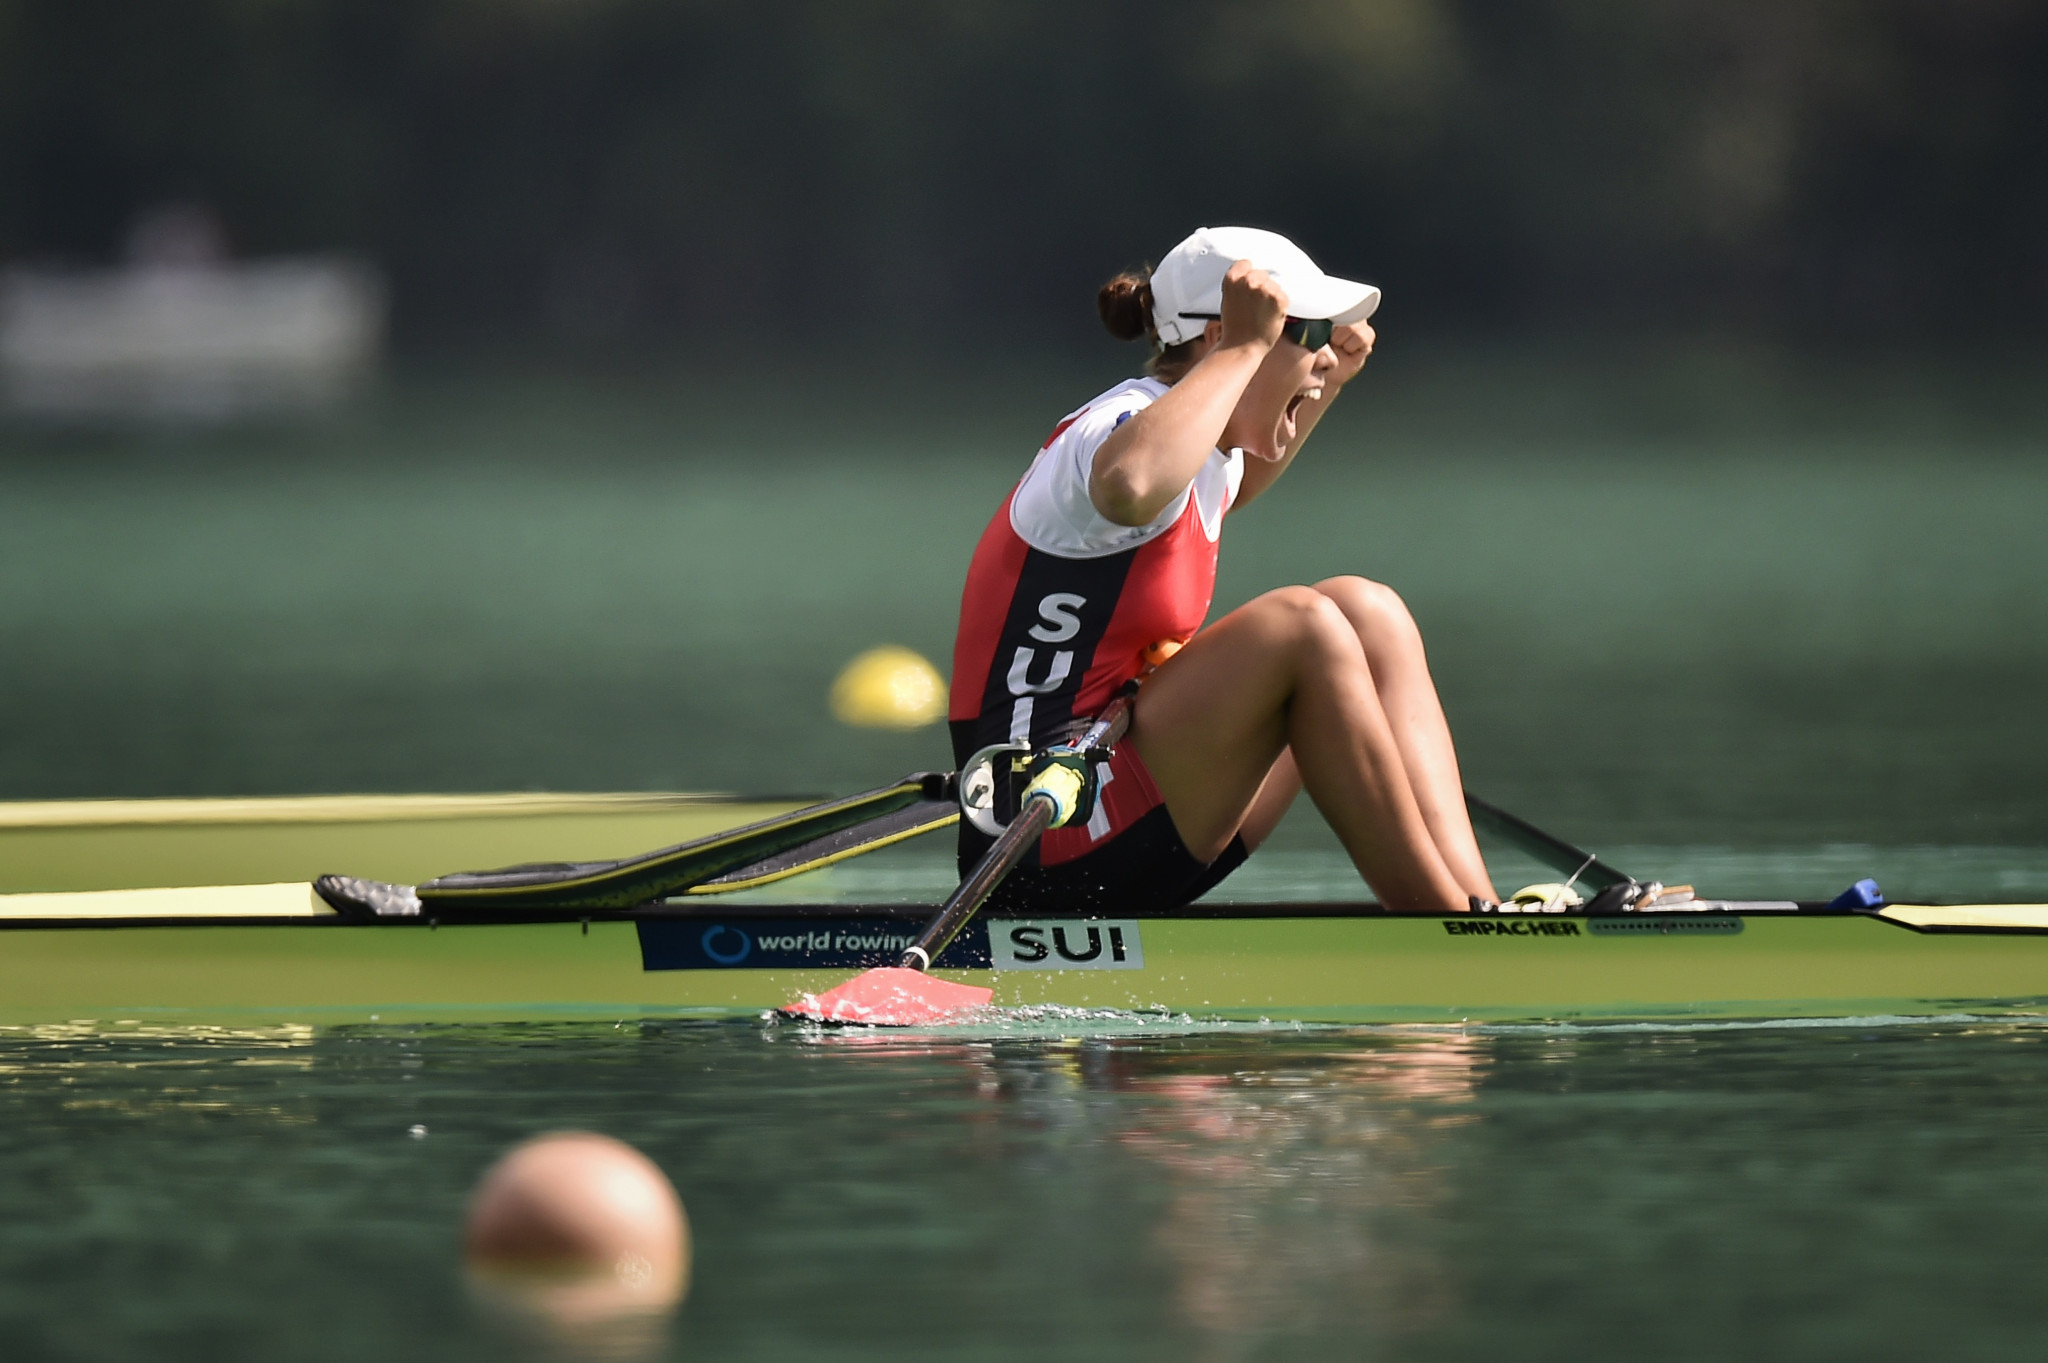 Switzerland's world champion Jeannine Gmelin, unbeaten so far this season, will be hoping to claim victory in the women's single sculls at the European Championships in Glasgow ©Getty Images